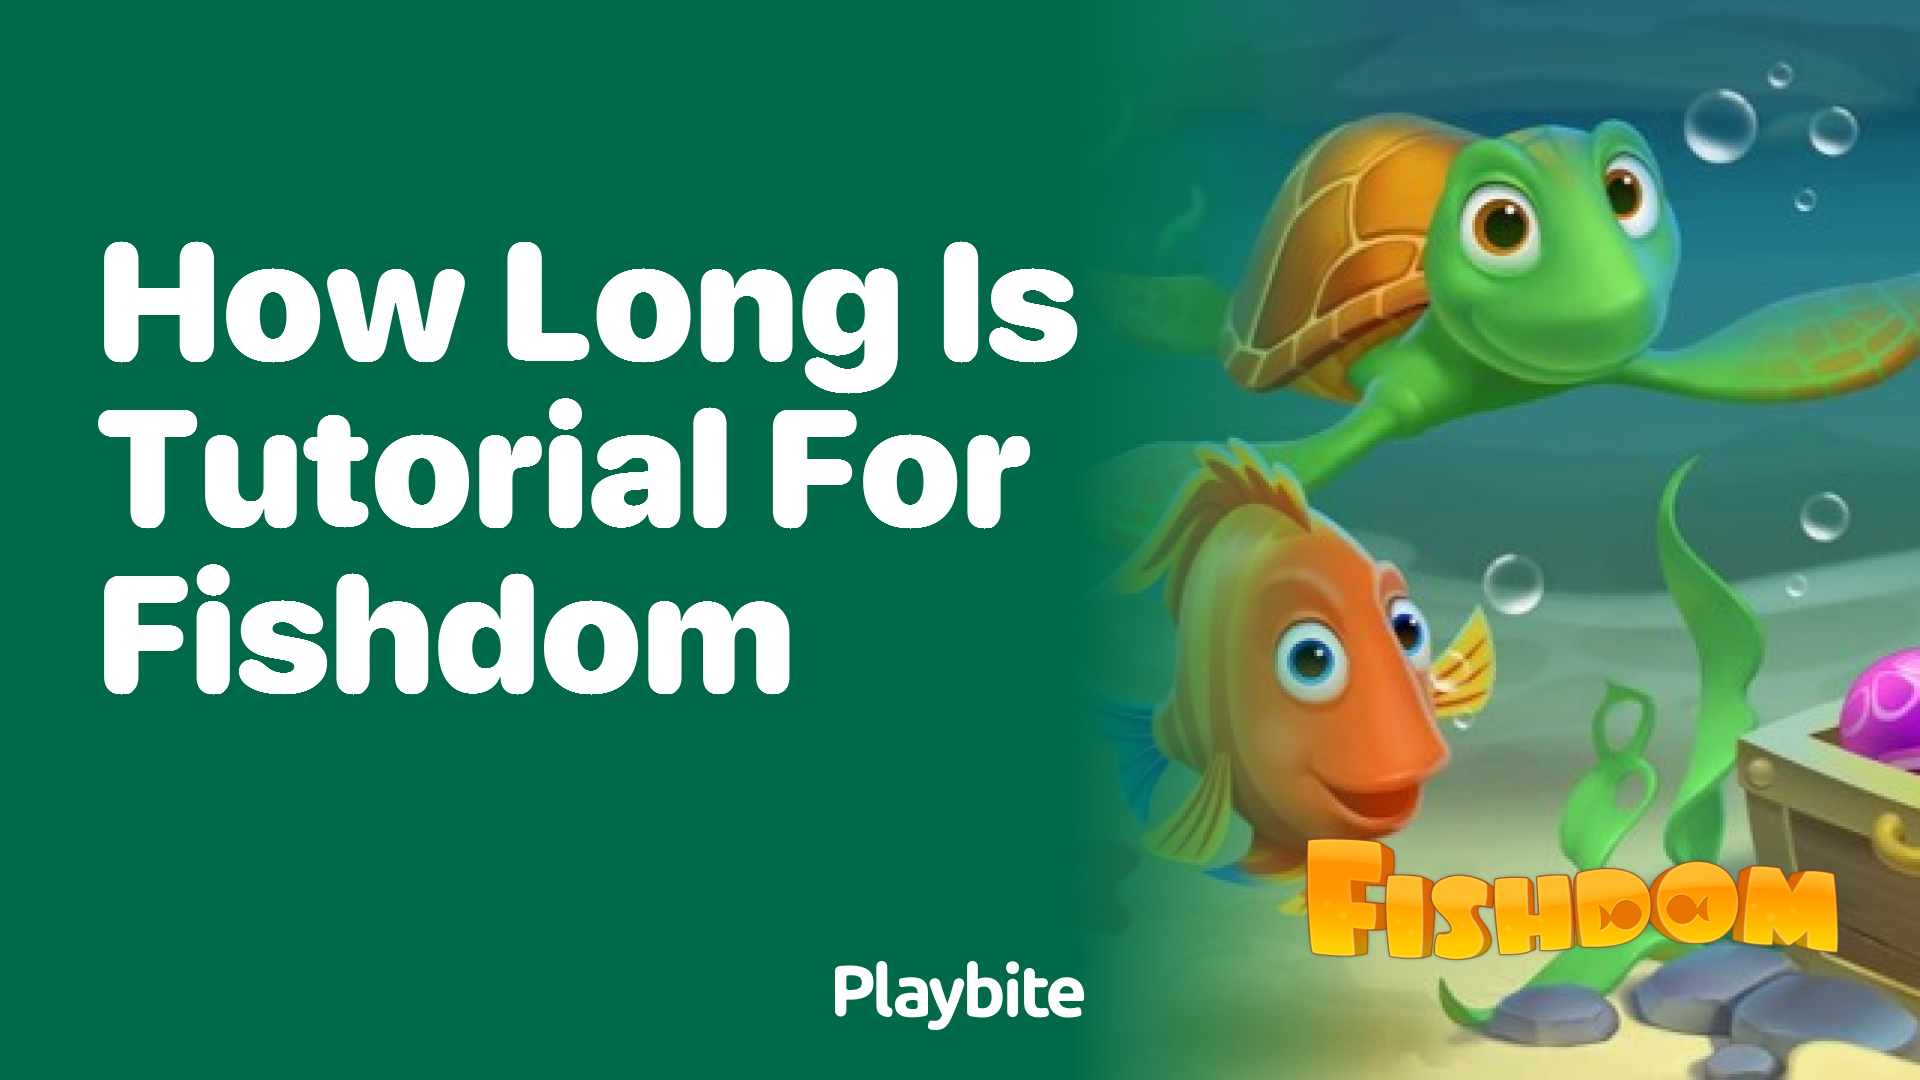 How Long is the Tutorial for Fishdom?